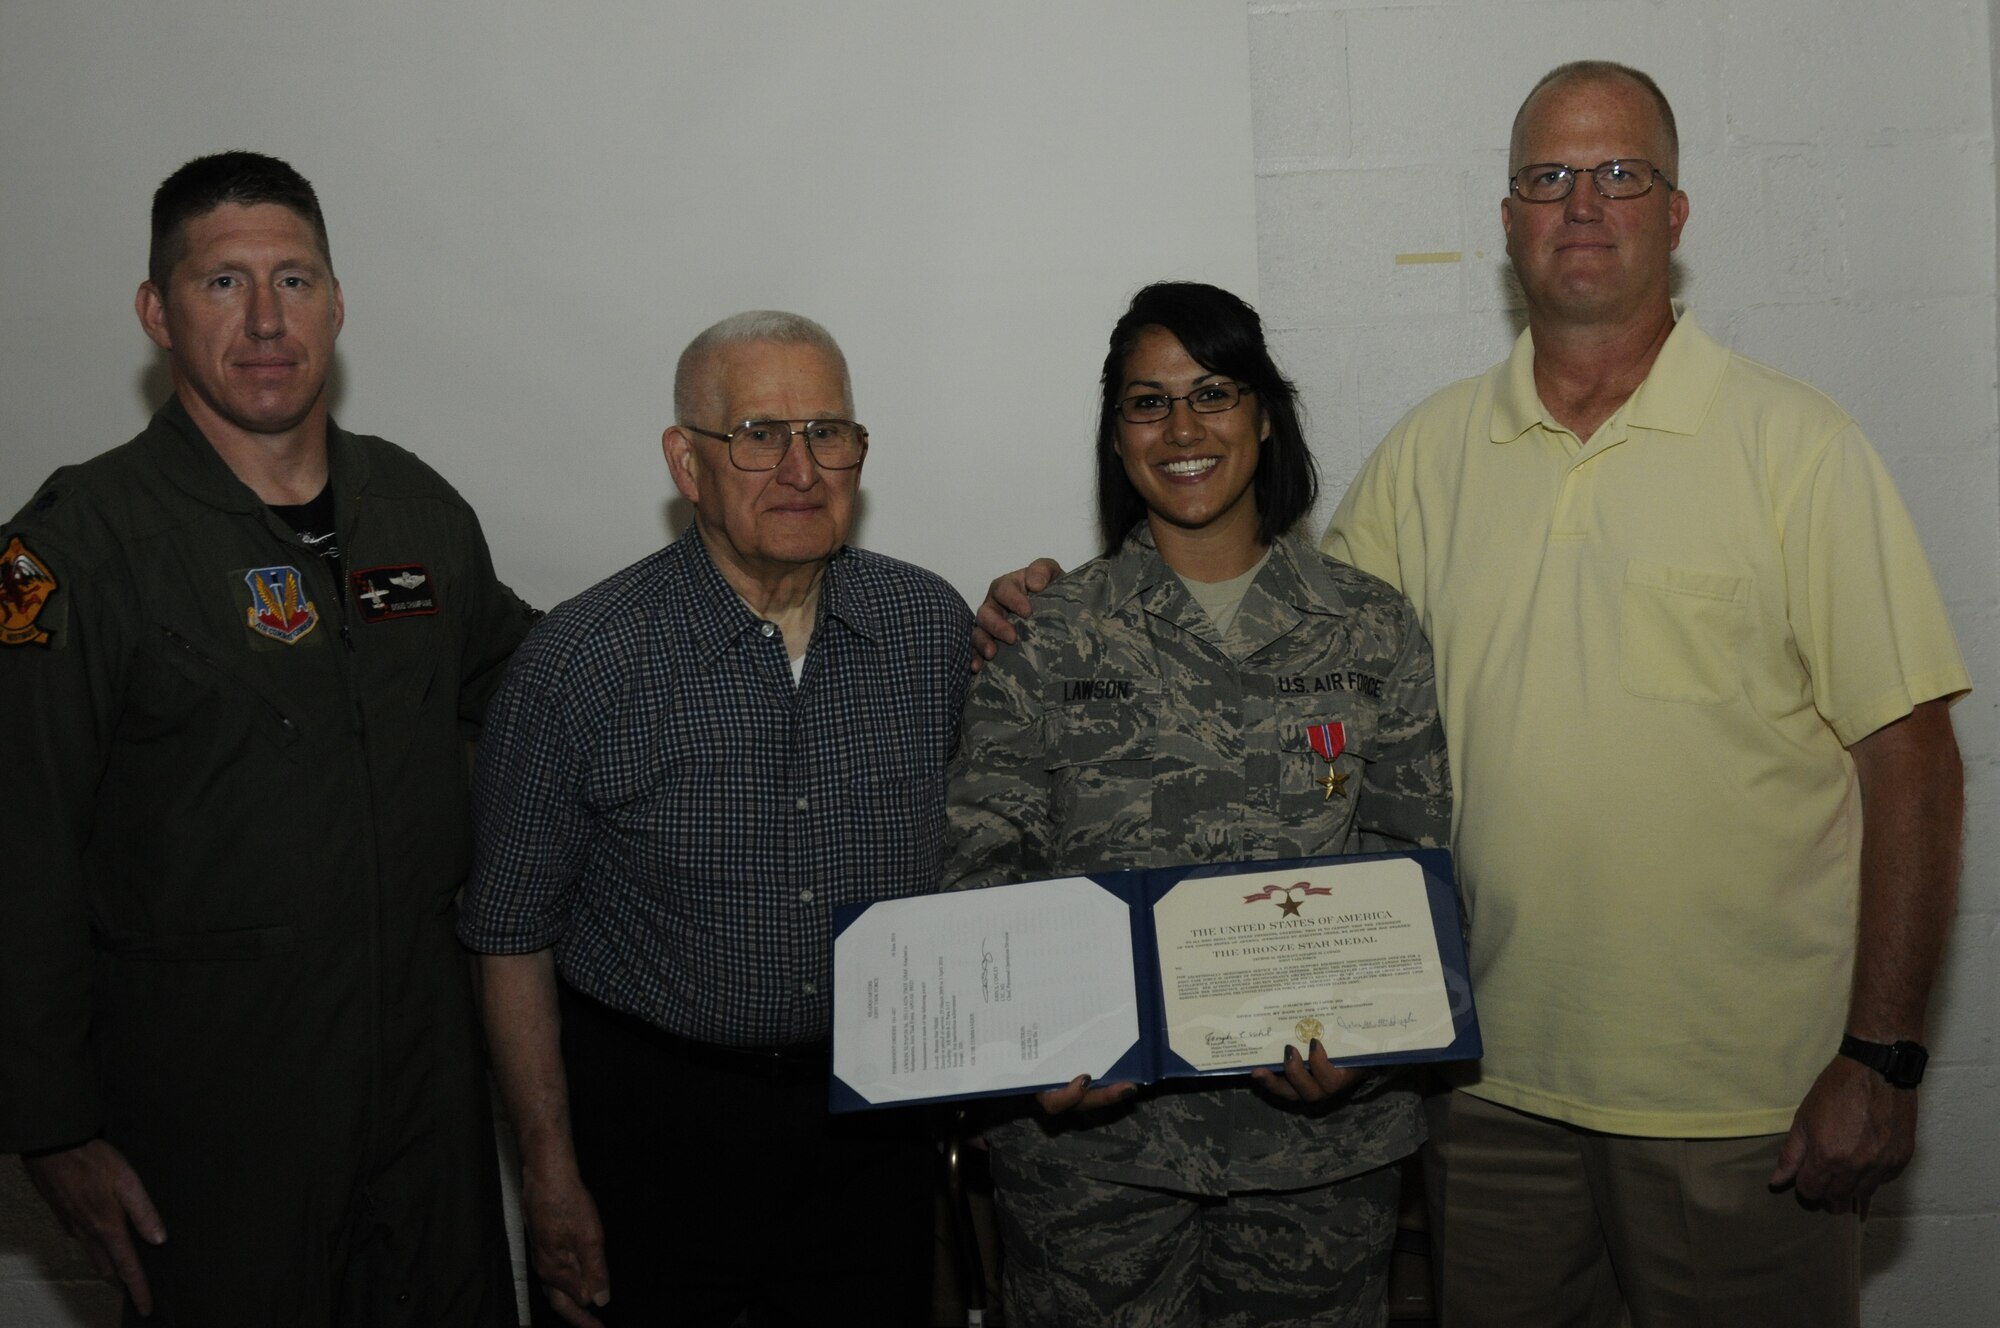 Technical Sgt. Supapon Lawson, an aircrew flight equipment specialist with the 107th Fighter Squadron, was awarded the Bronze Star Medal for exceptional meritorious service at a ceremony held at Selfridge Air National Guard Base on June 6. Lawson served as an aircrew life support technician during a deployment to Iraq in which she volunteered for several tour extensions, which lengthened her stay to almost two years. On hand during the medal presentation ceremony were Lt. Col. Douglas Champagne, 107th Fighter Squadron commander, TSgt. Lawson's grandfather and World War II veteran, Mr. Dick Lawson, and her father, Mr. Doug Lawson, a former Air Force security forces officer. (U.S. Air Force photo by TSgt. David Kujawa)